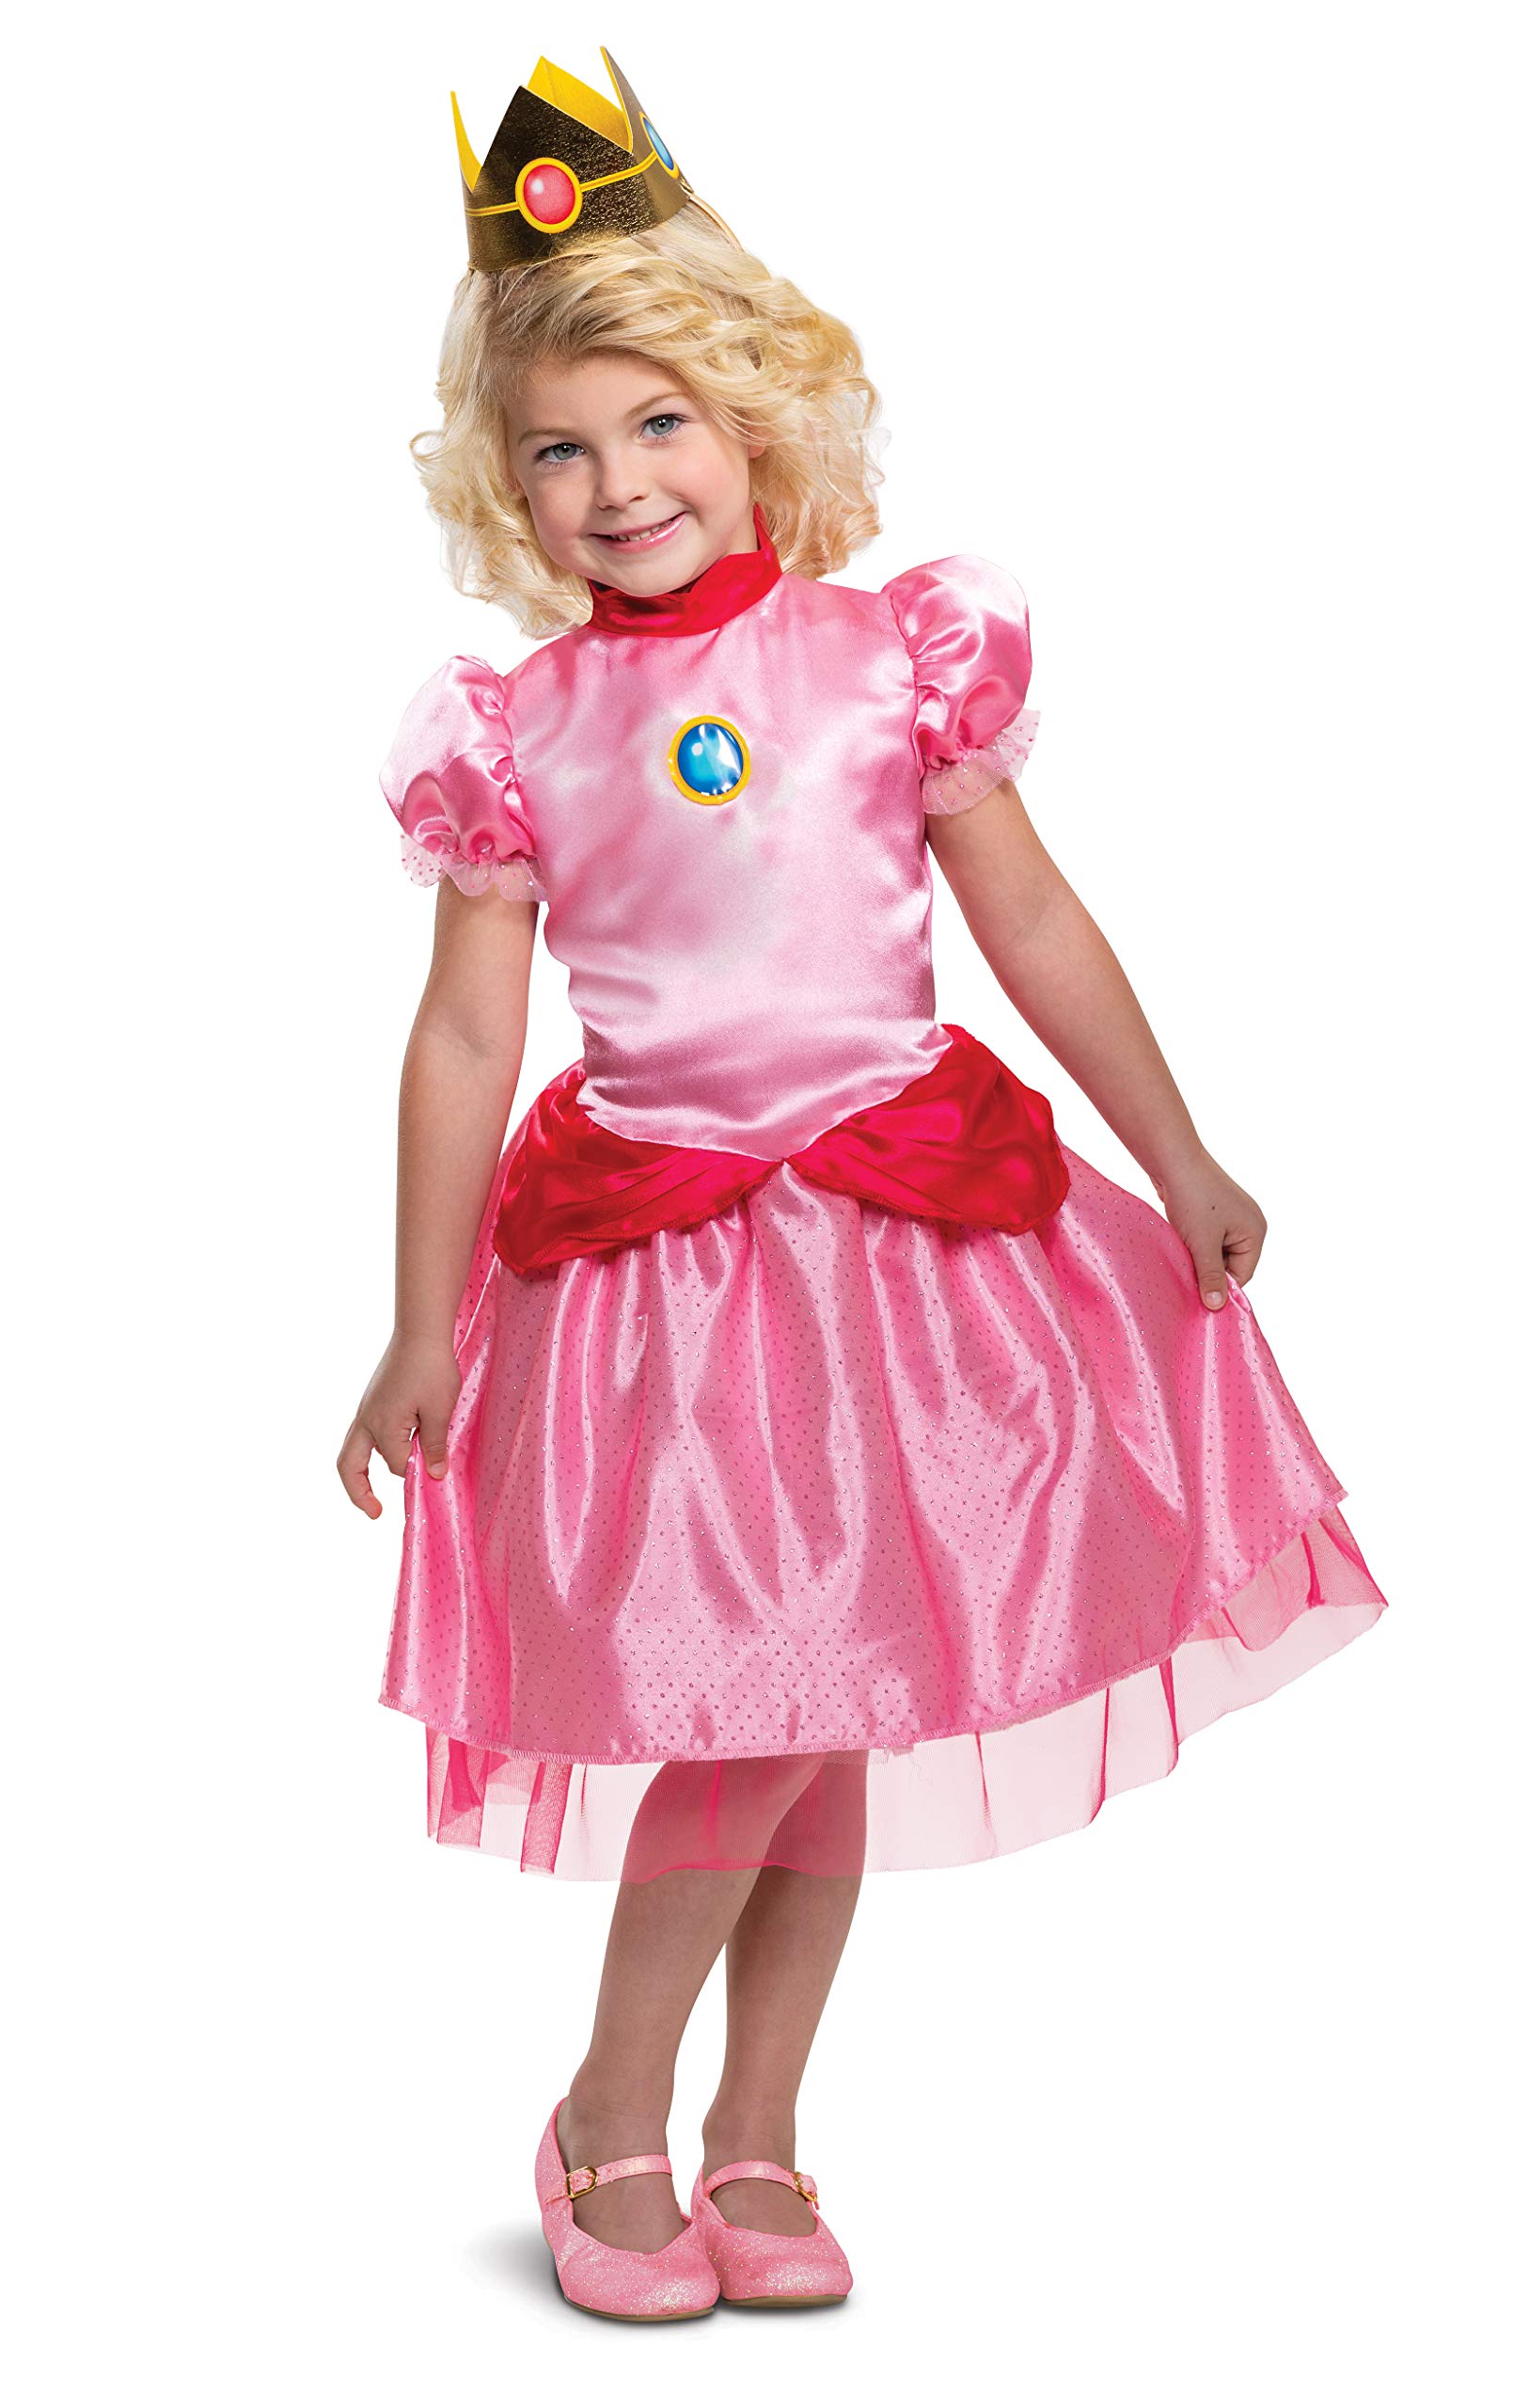 Disguise Brand Princess Peach Costume Dress: 2T $17.50 + Free Shipping w/ Prime or on $35+